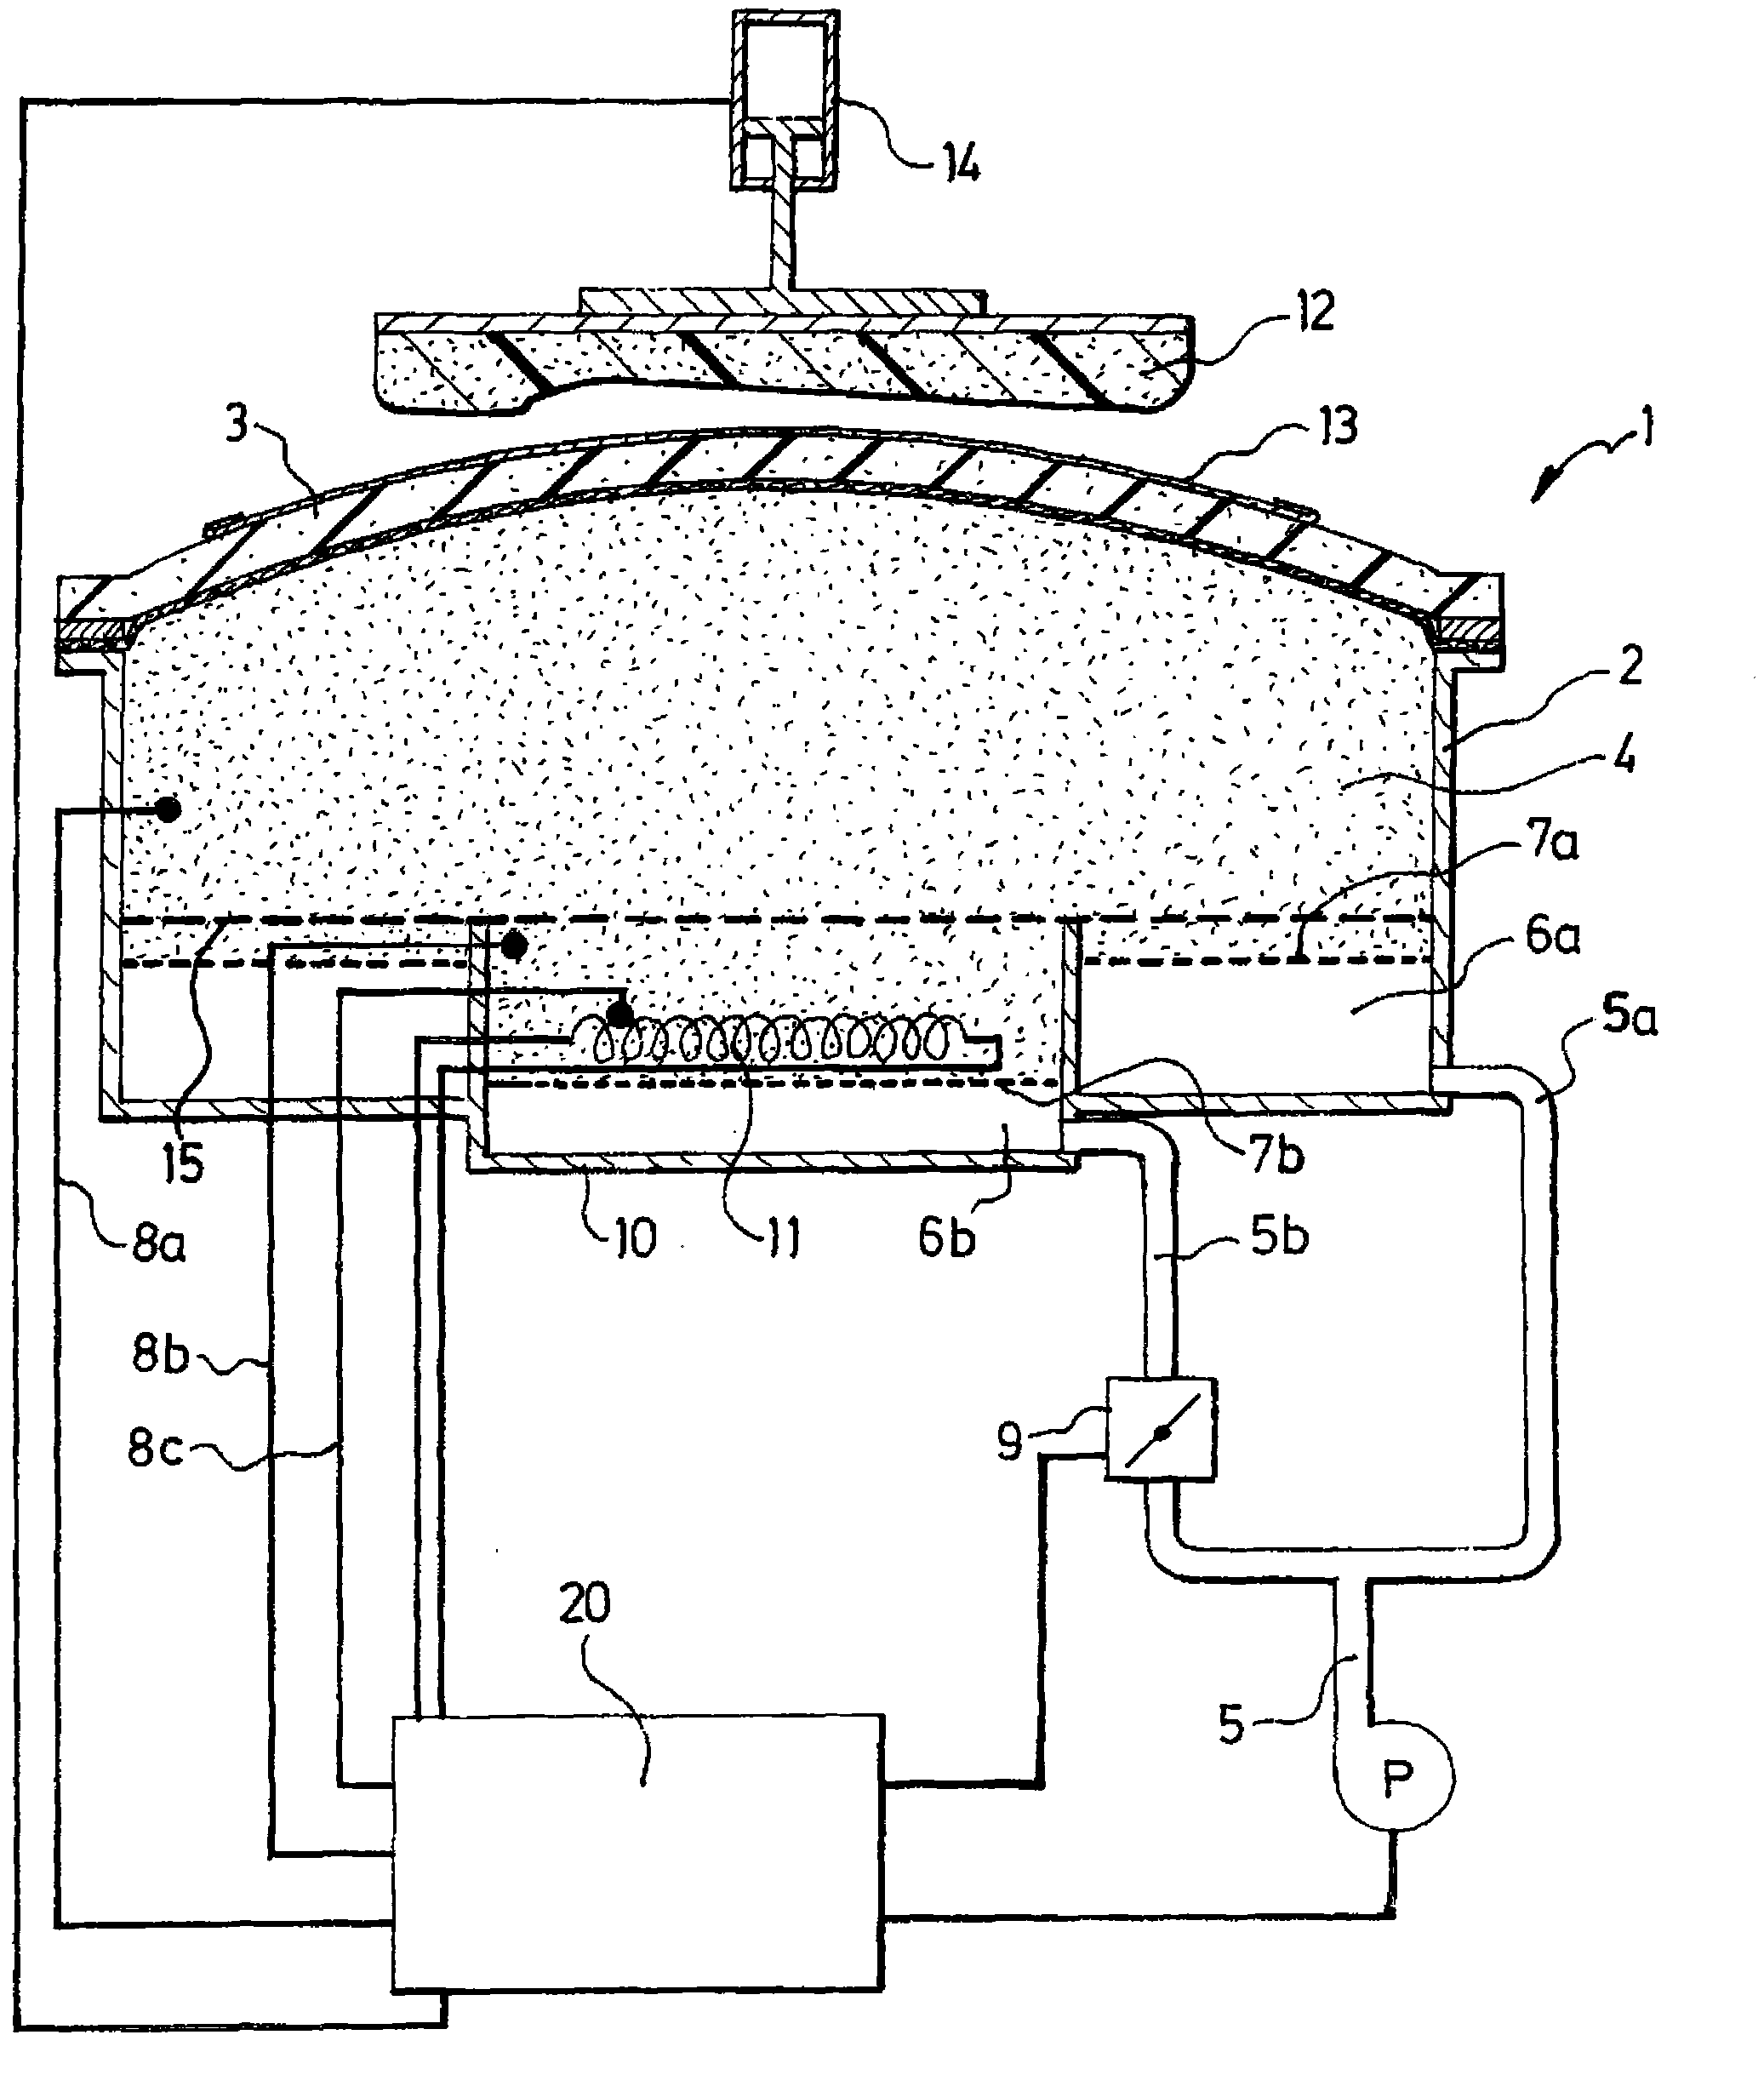 Device and method for thermally bonding a flexible coating to a support